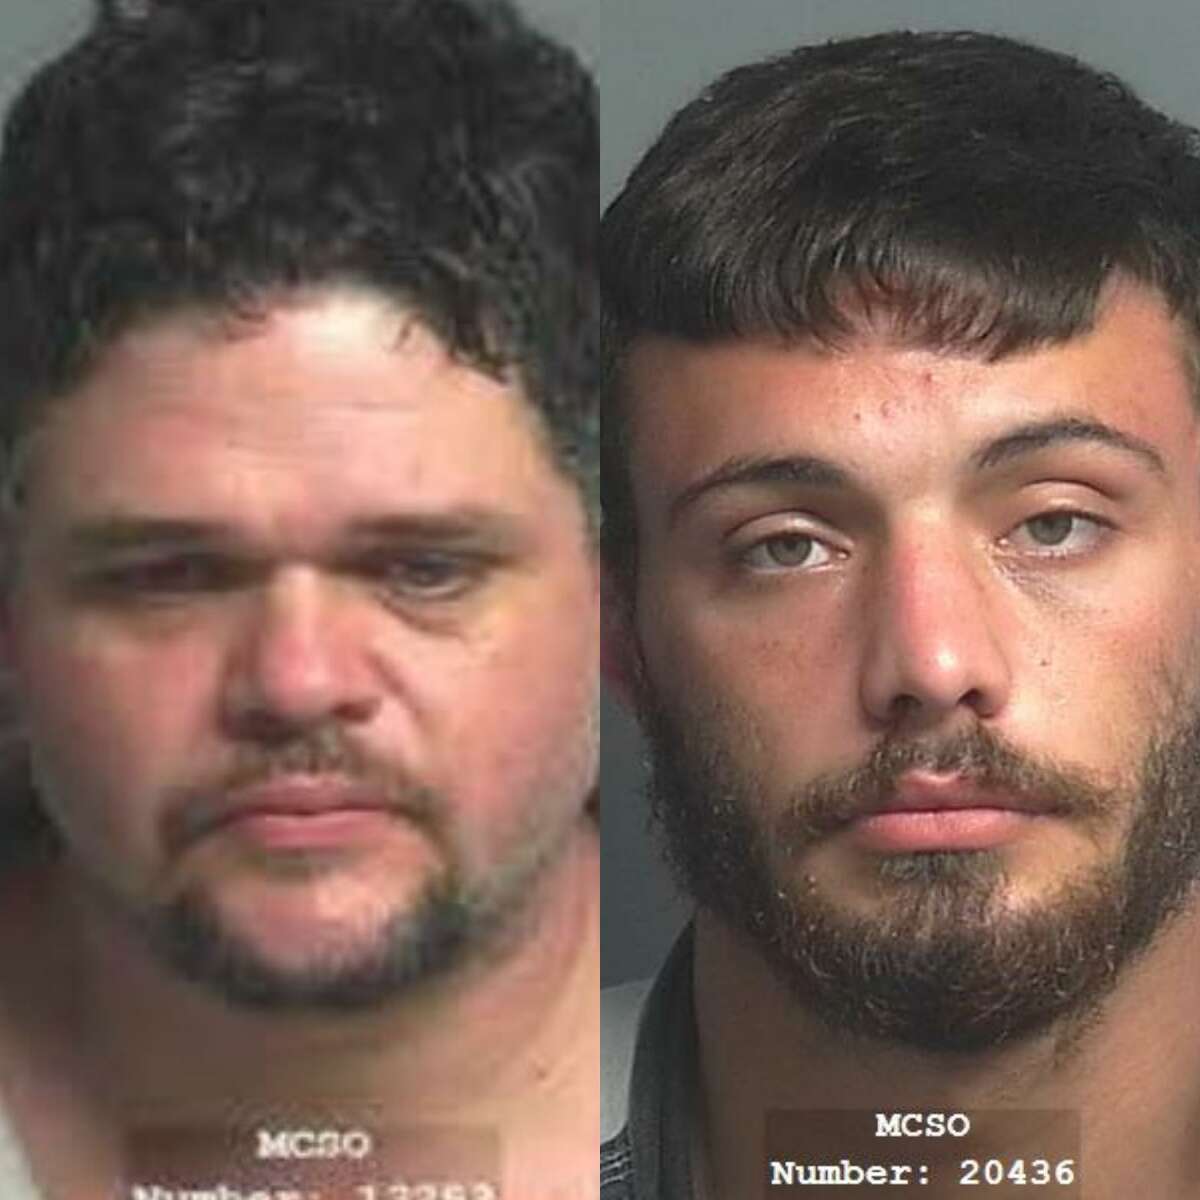 Chase Matthew Reese, 24, and Noe Antonio Saenz, 40, both of Conroe, are charged each with theft, a third-degree felony. Saenz also is charged with theft of property, a state jail felony, and possession of a prohibited weapon, a third-degree felony,